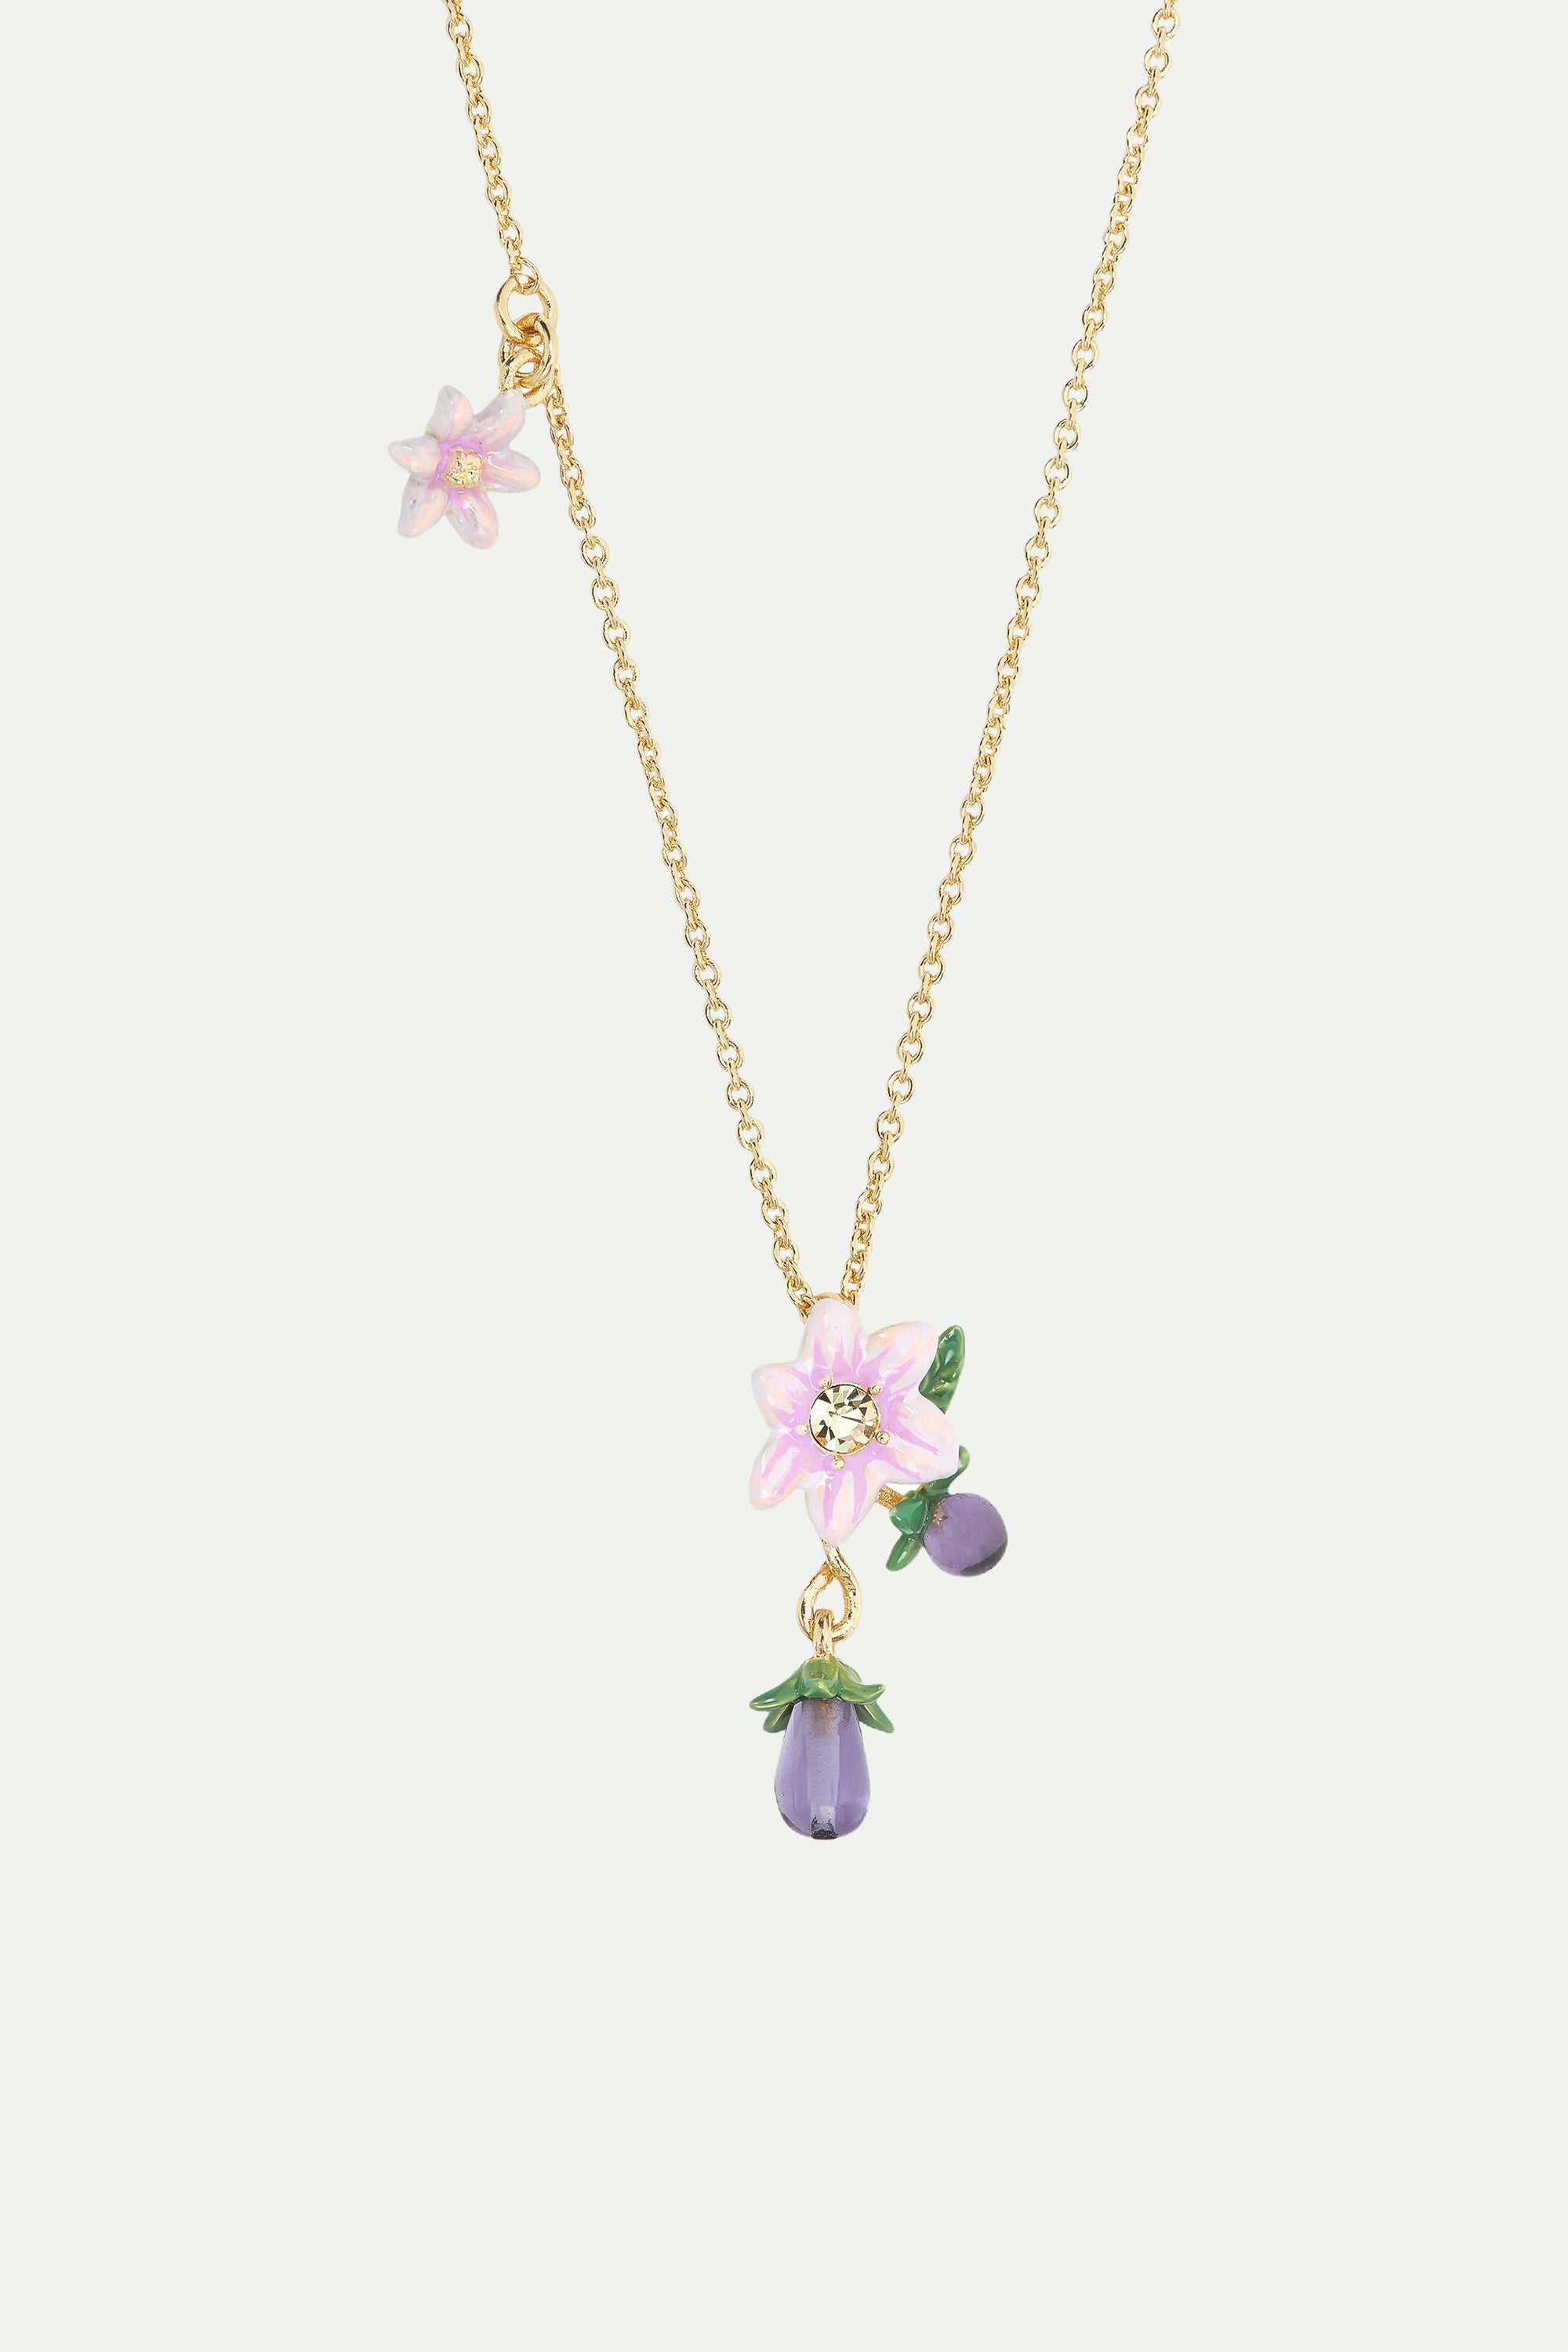 Aubergine and flower pendant necklace